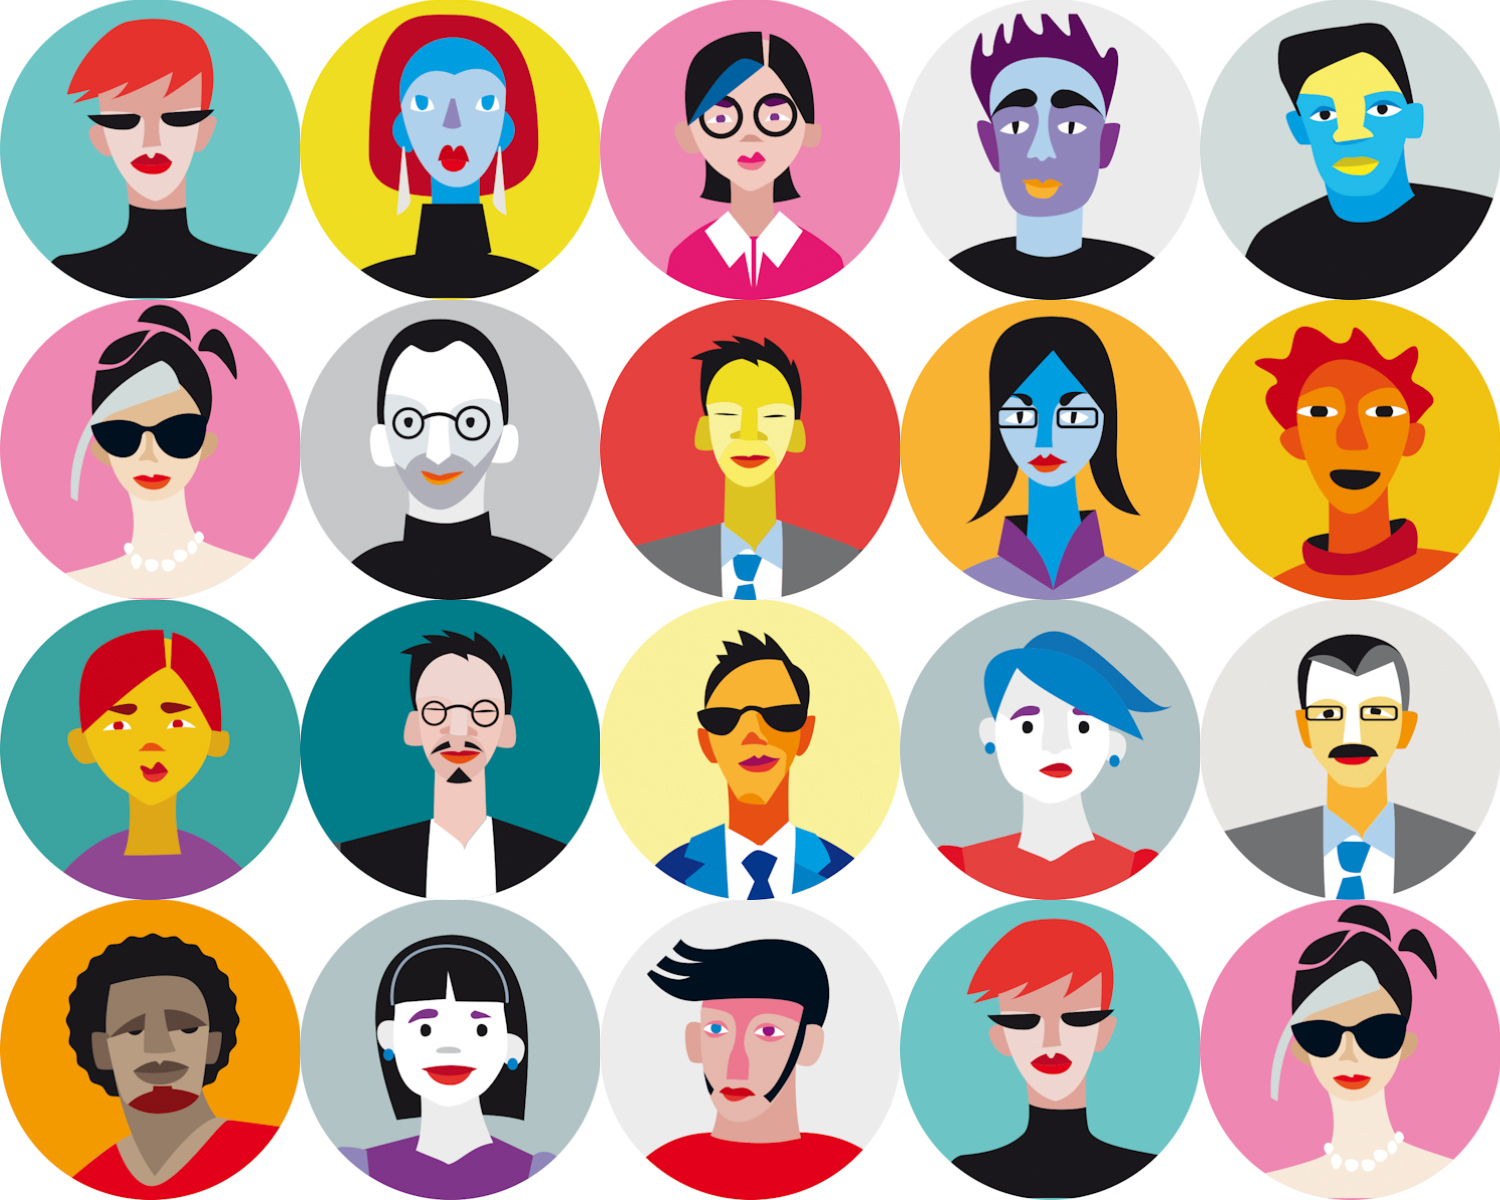 Circular People avatar for web sites or games vectors